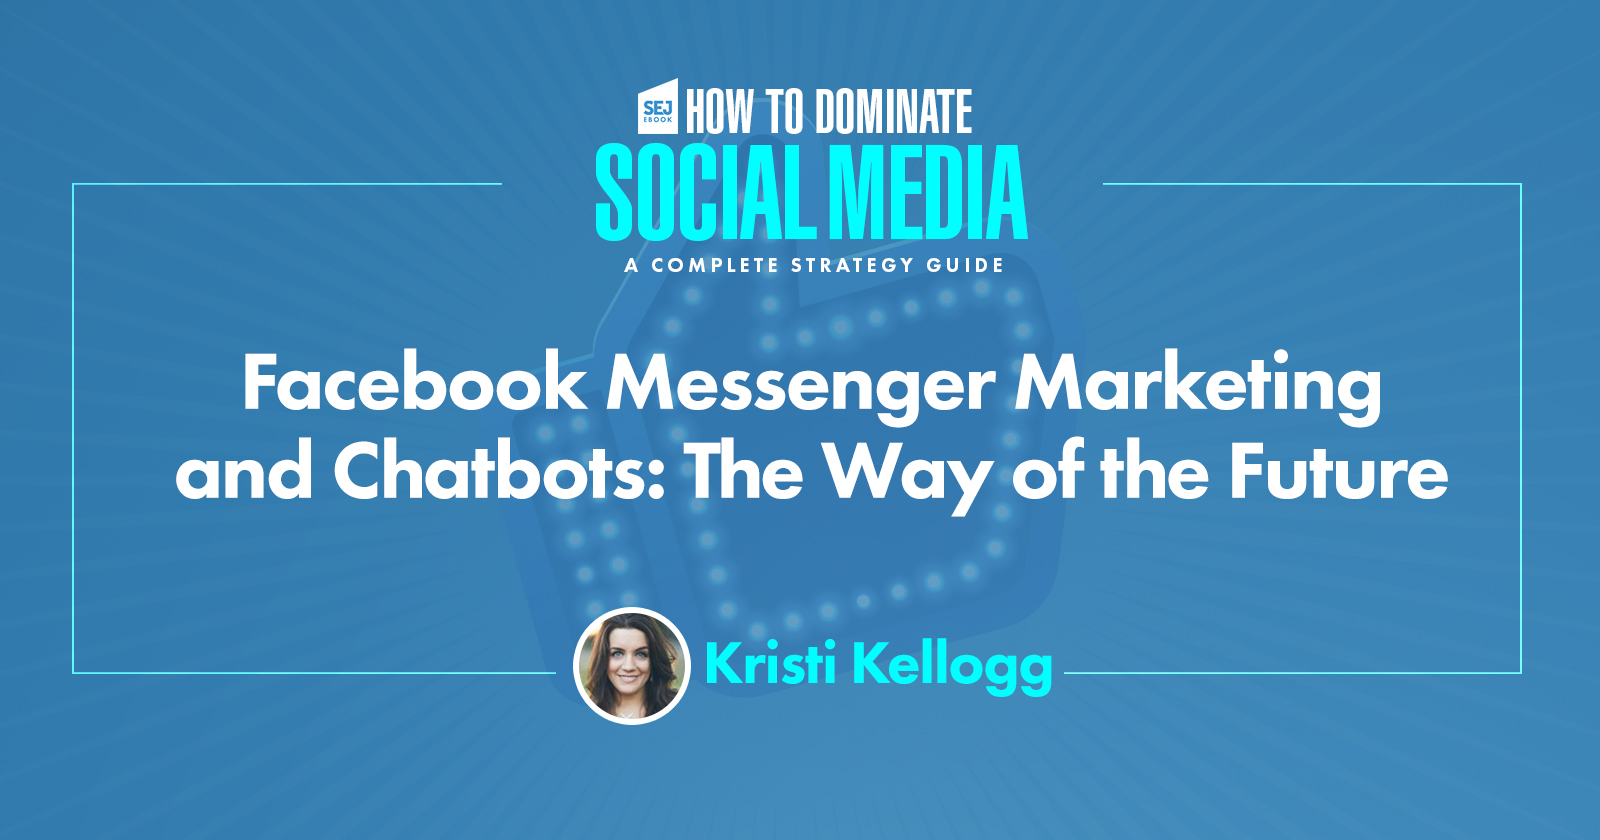 Facebook Messenger Marketing and Chatbots - The Way of the Future